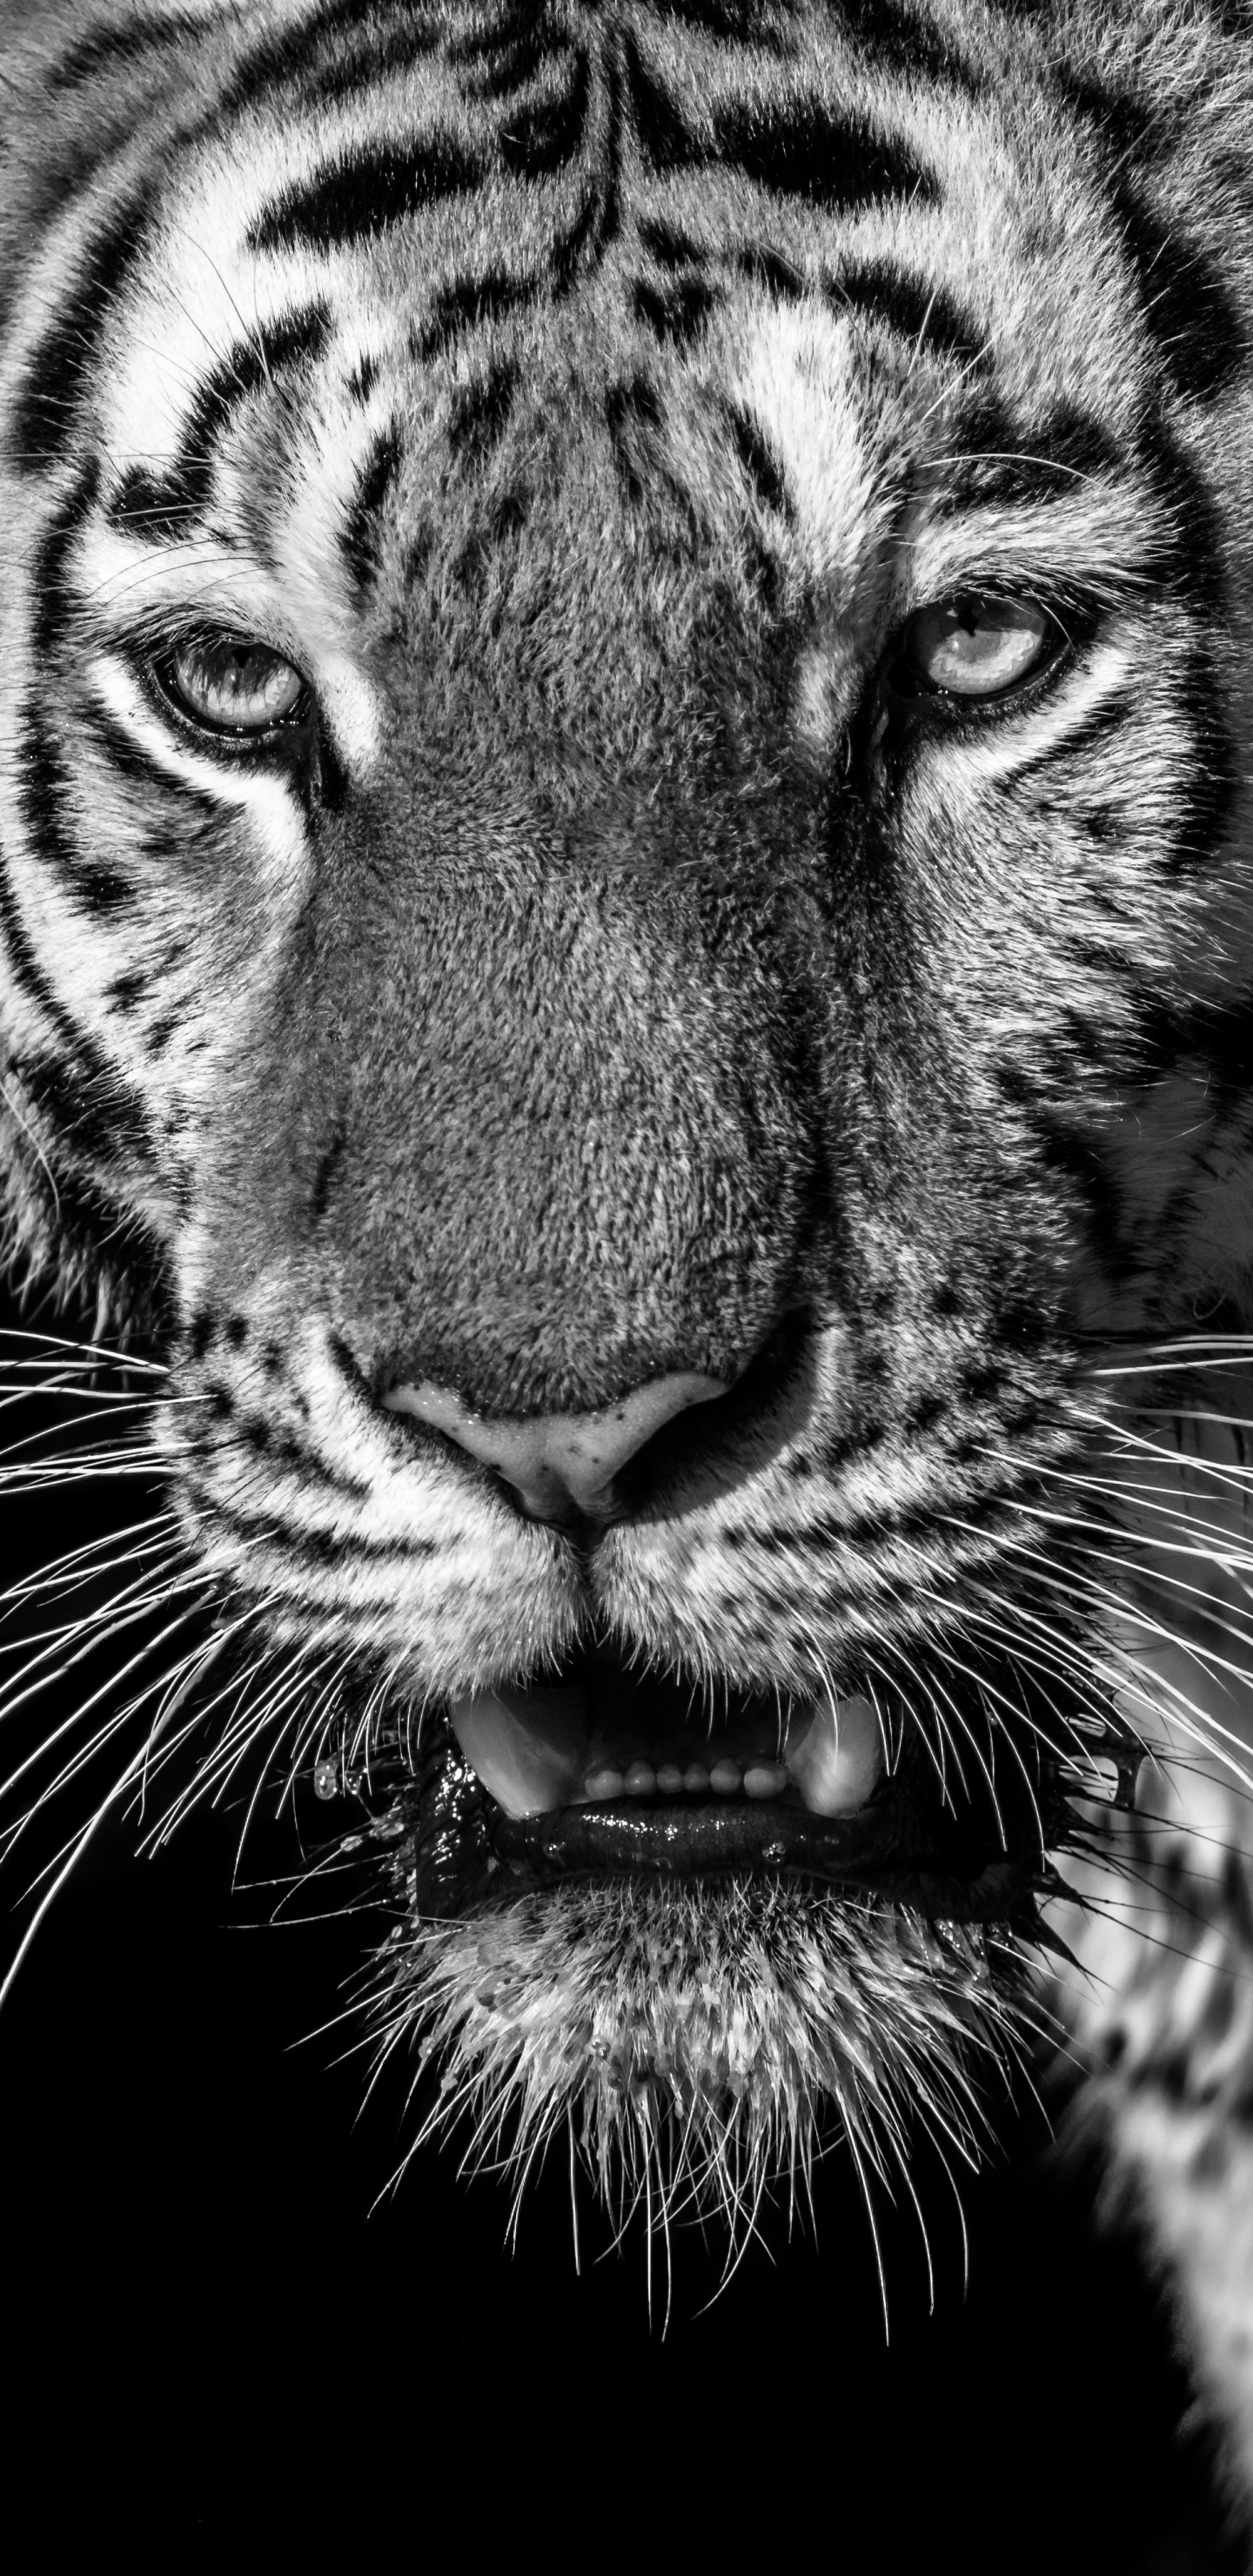 White and Black Tiger Illustration. Wallpaper in 1440x2960 Resolution